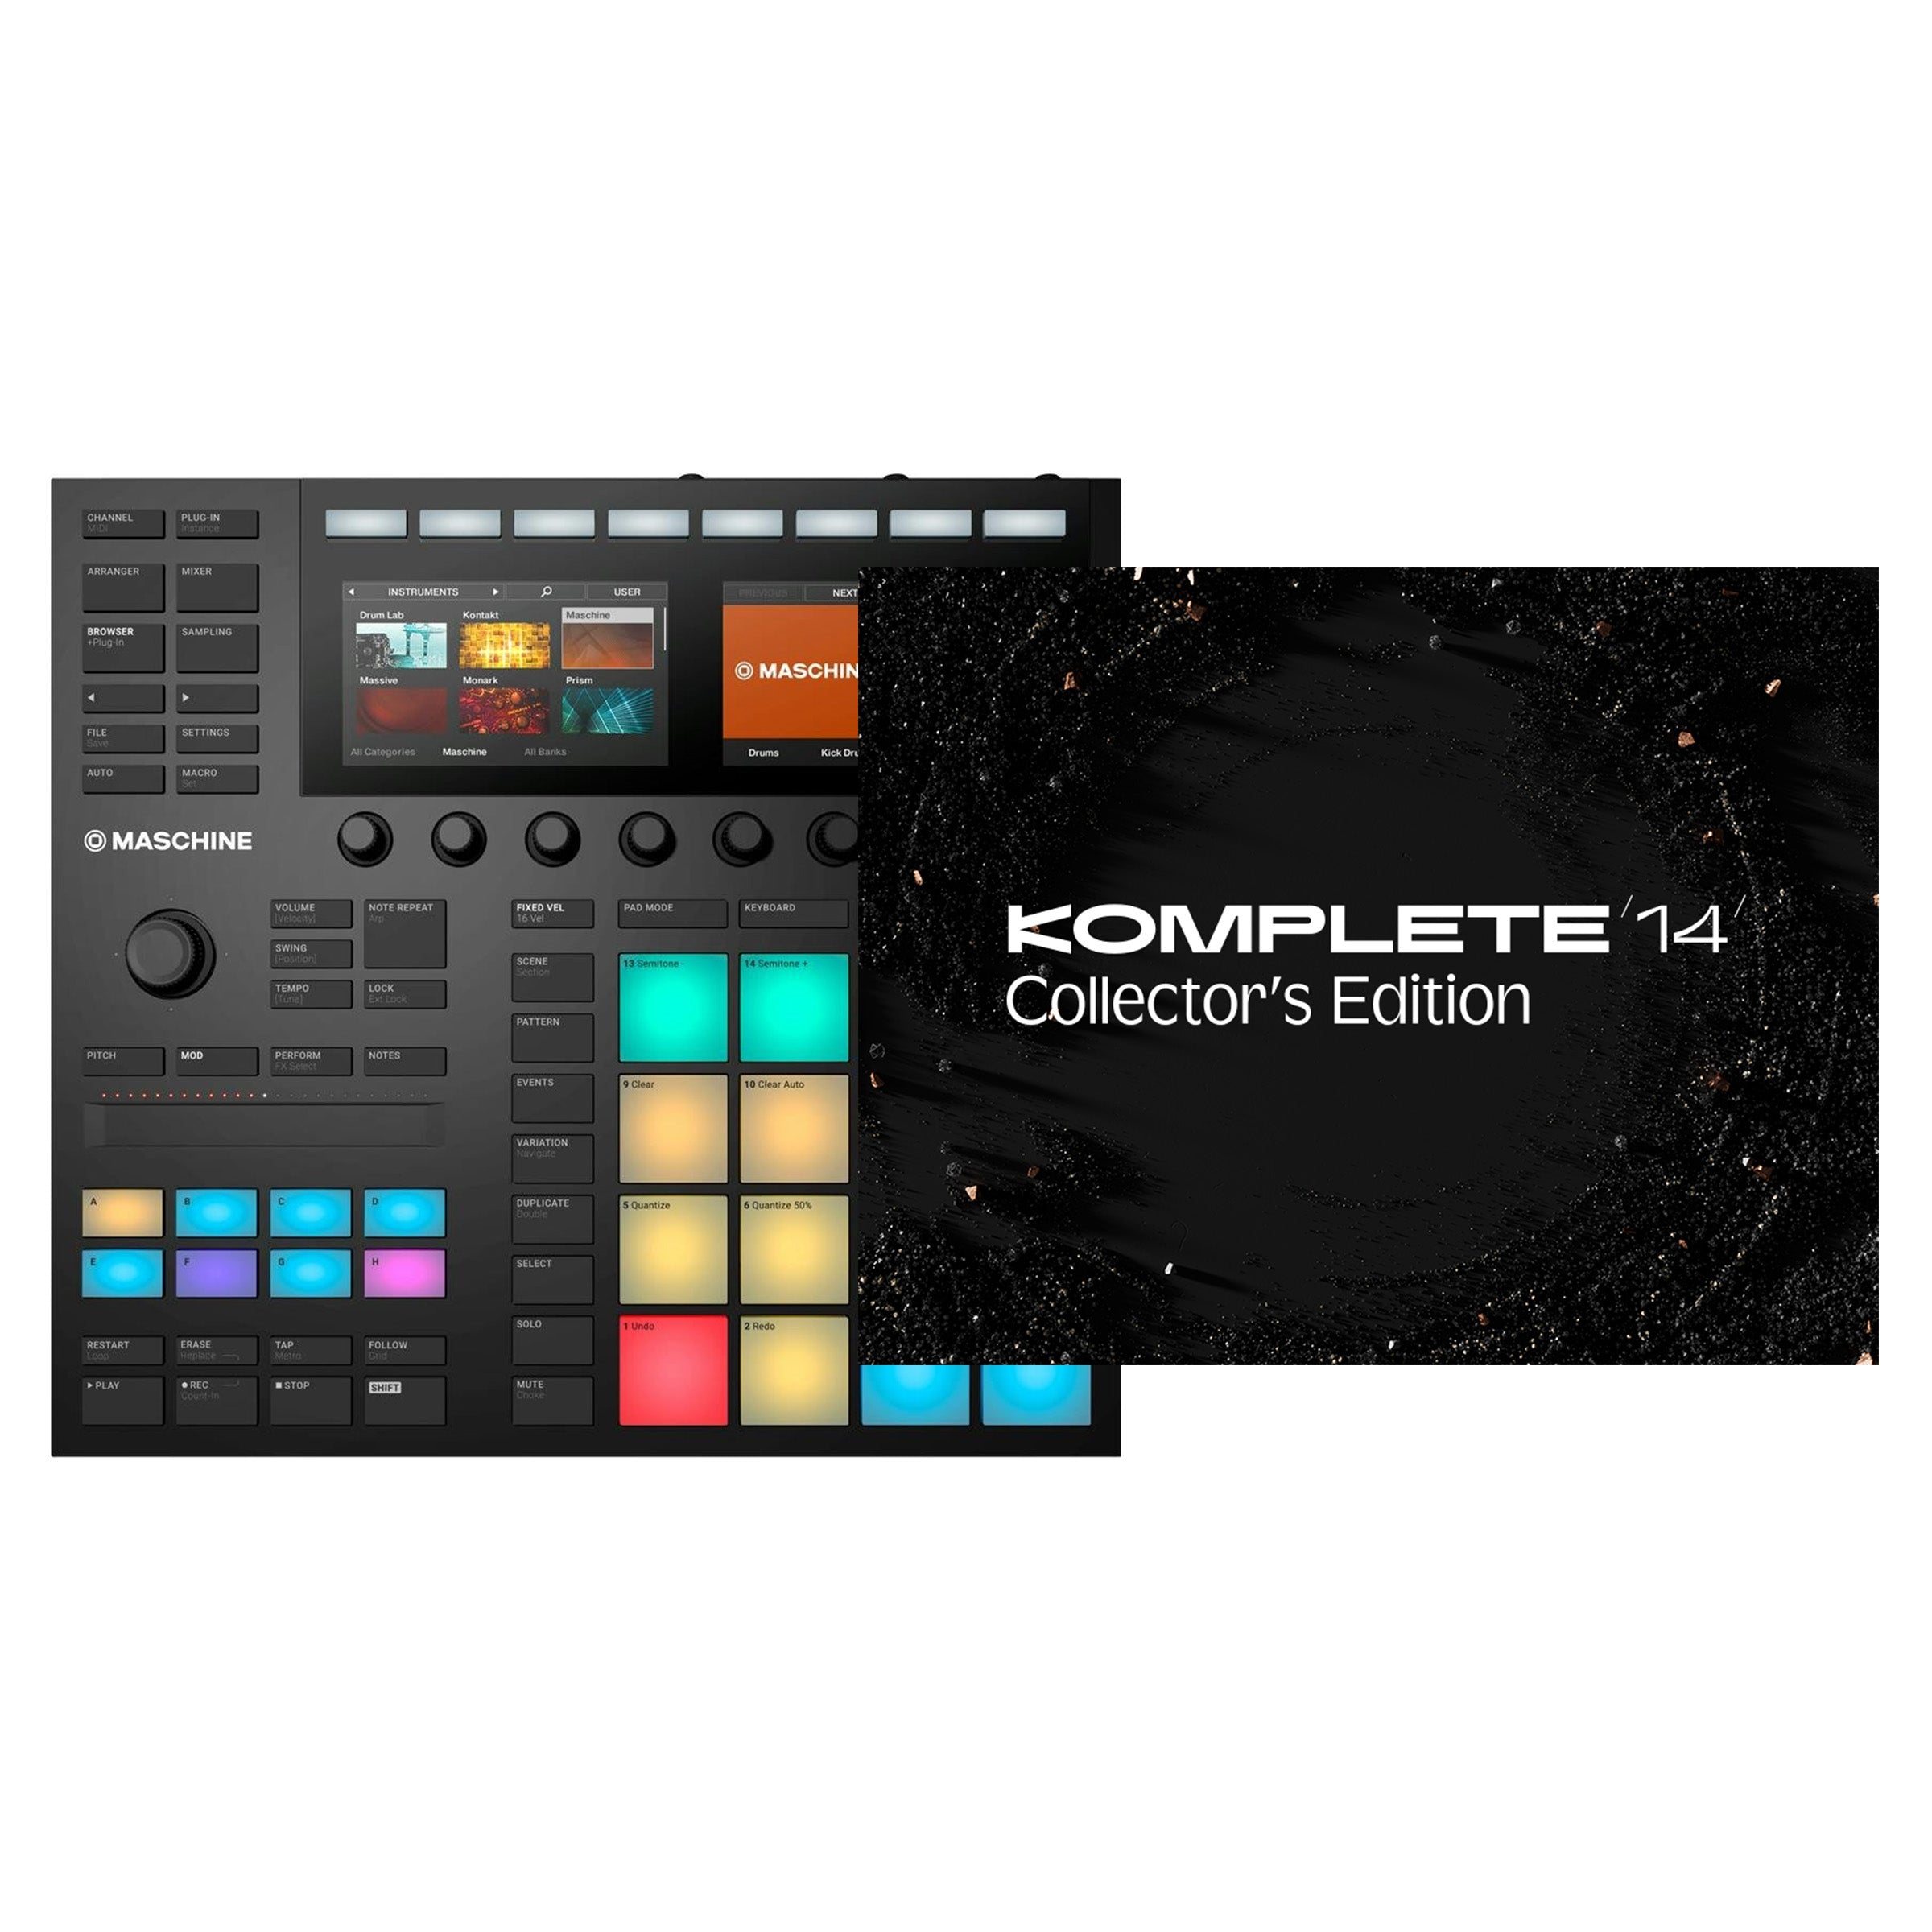 Native Instruments Maschine MK3 with Komplete 14 Collector's Edition